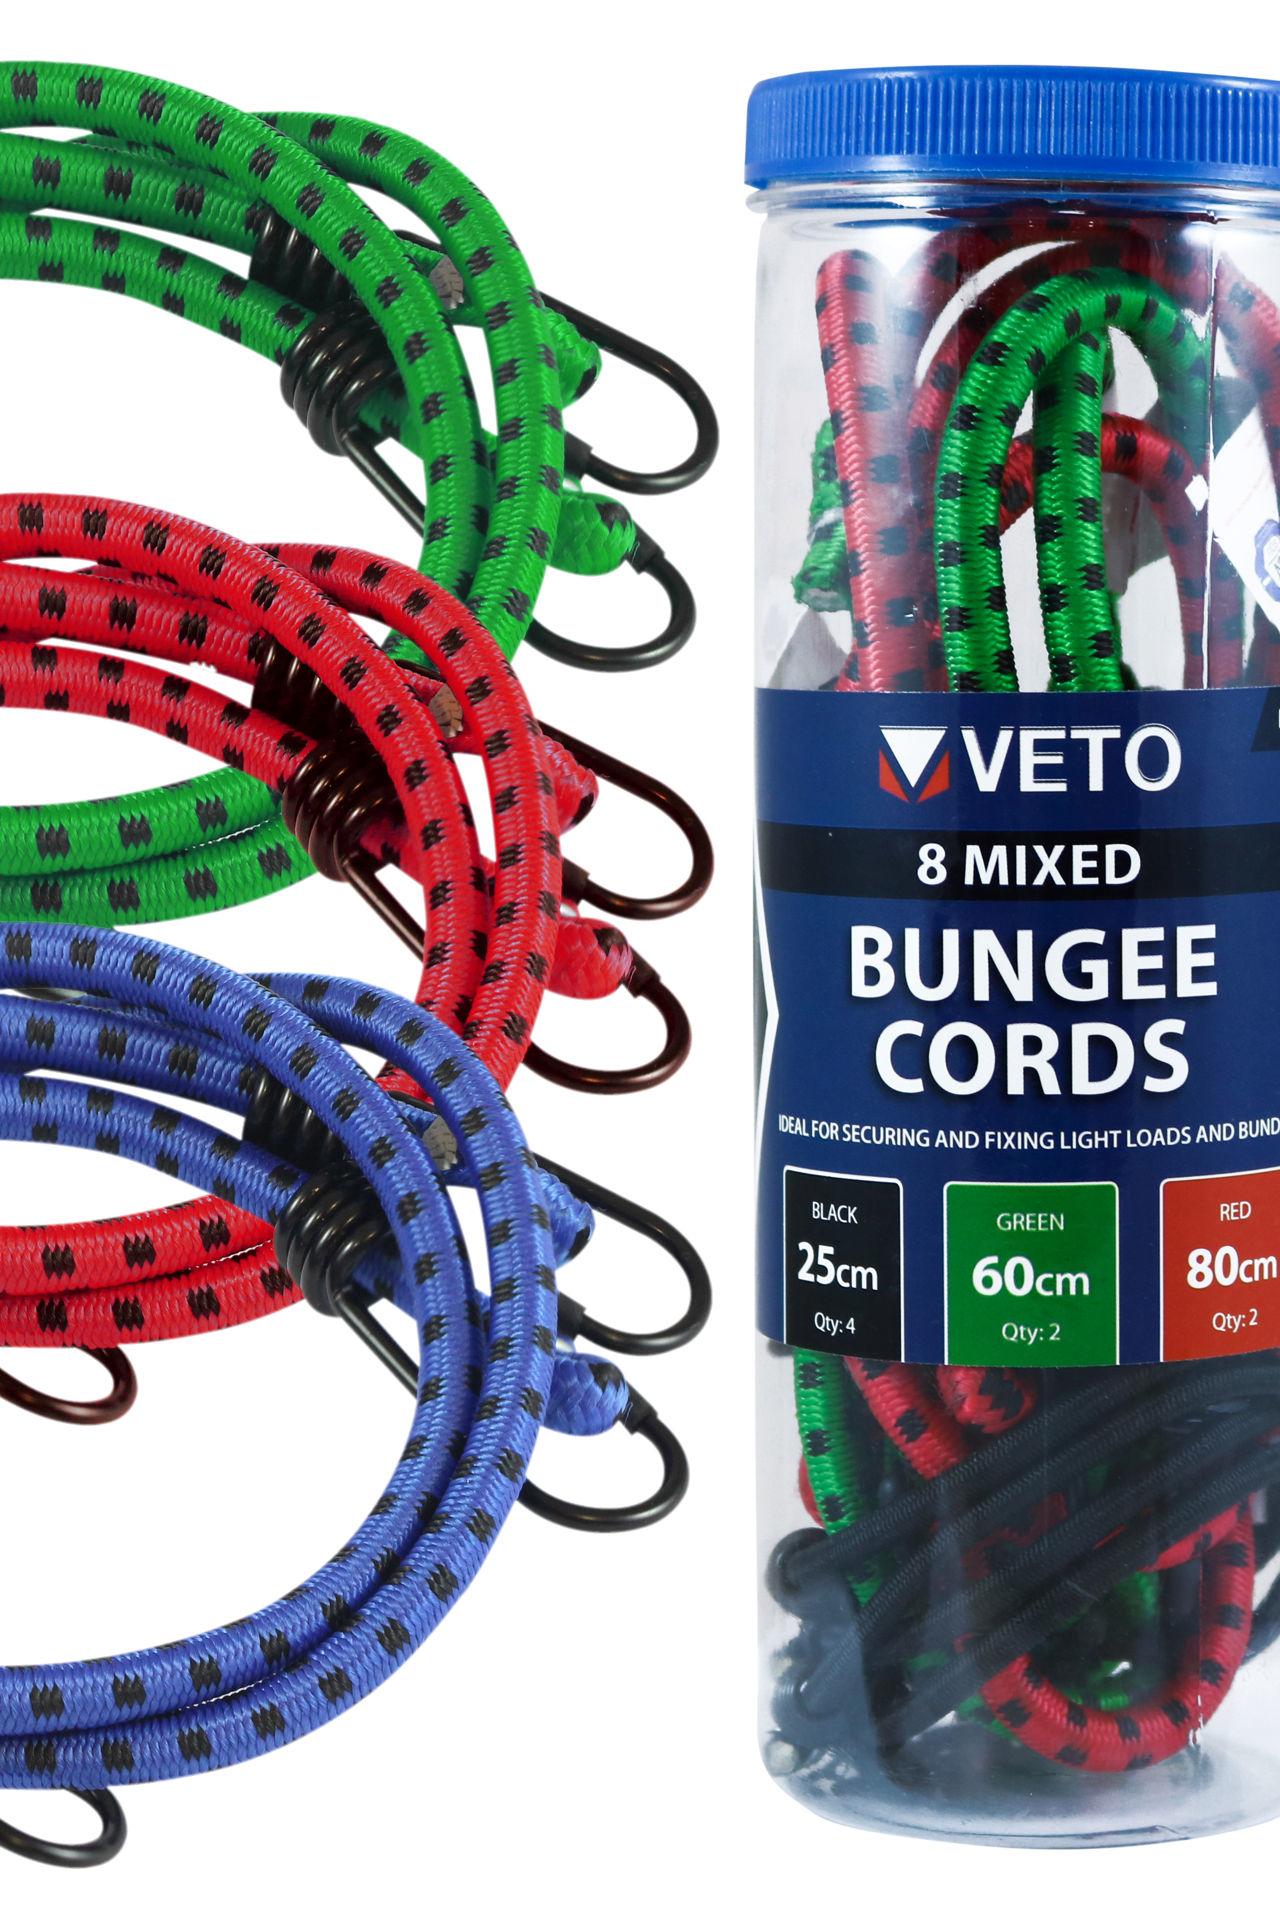 Veto Bungee Cords - Mixed Pack